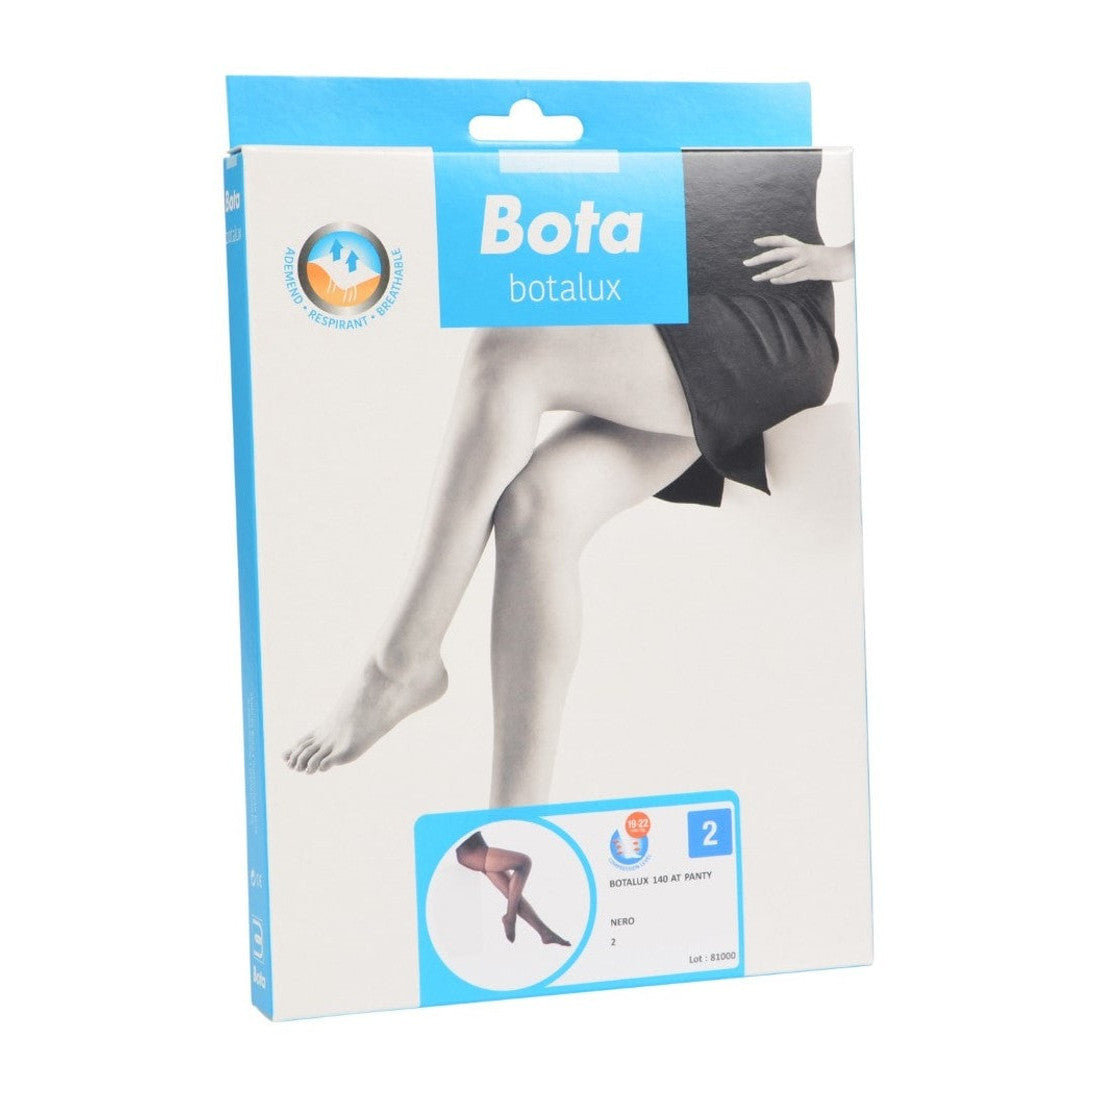 Botalux 140 support tights at nero - black